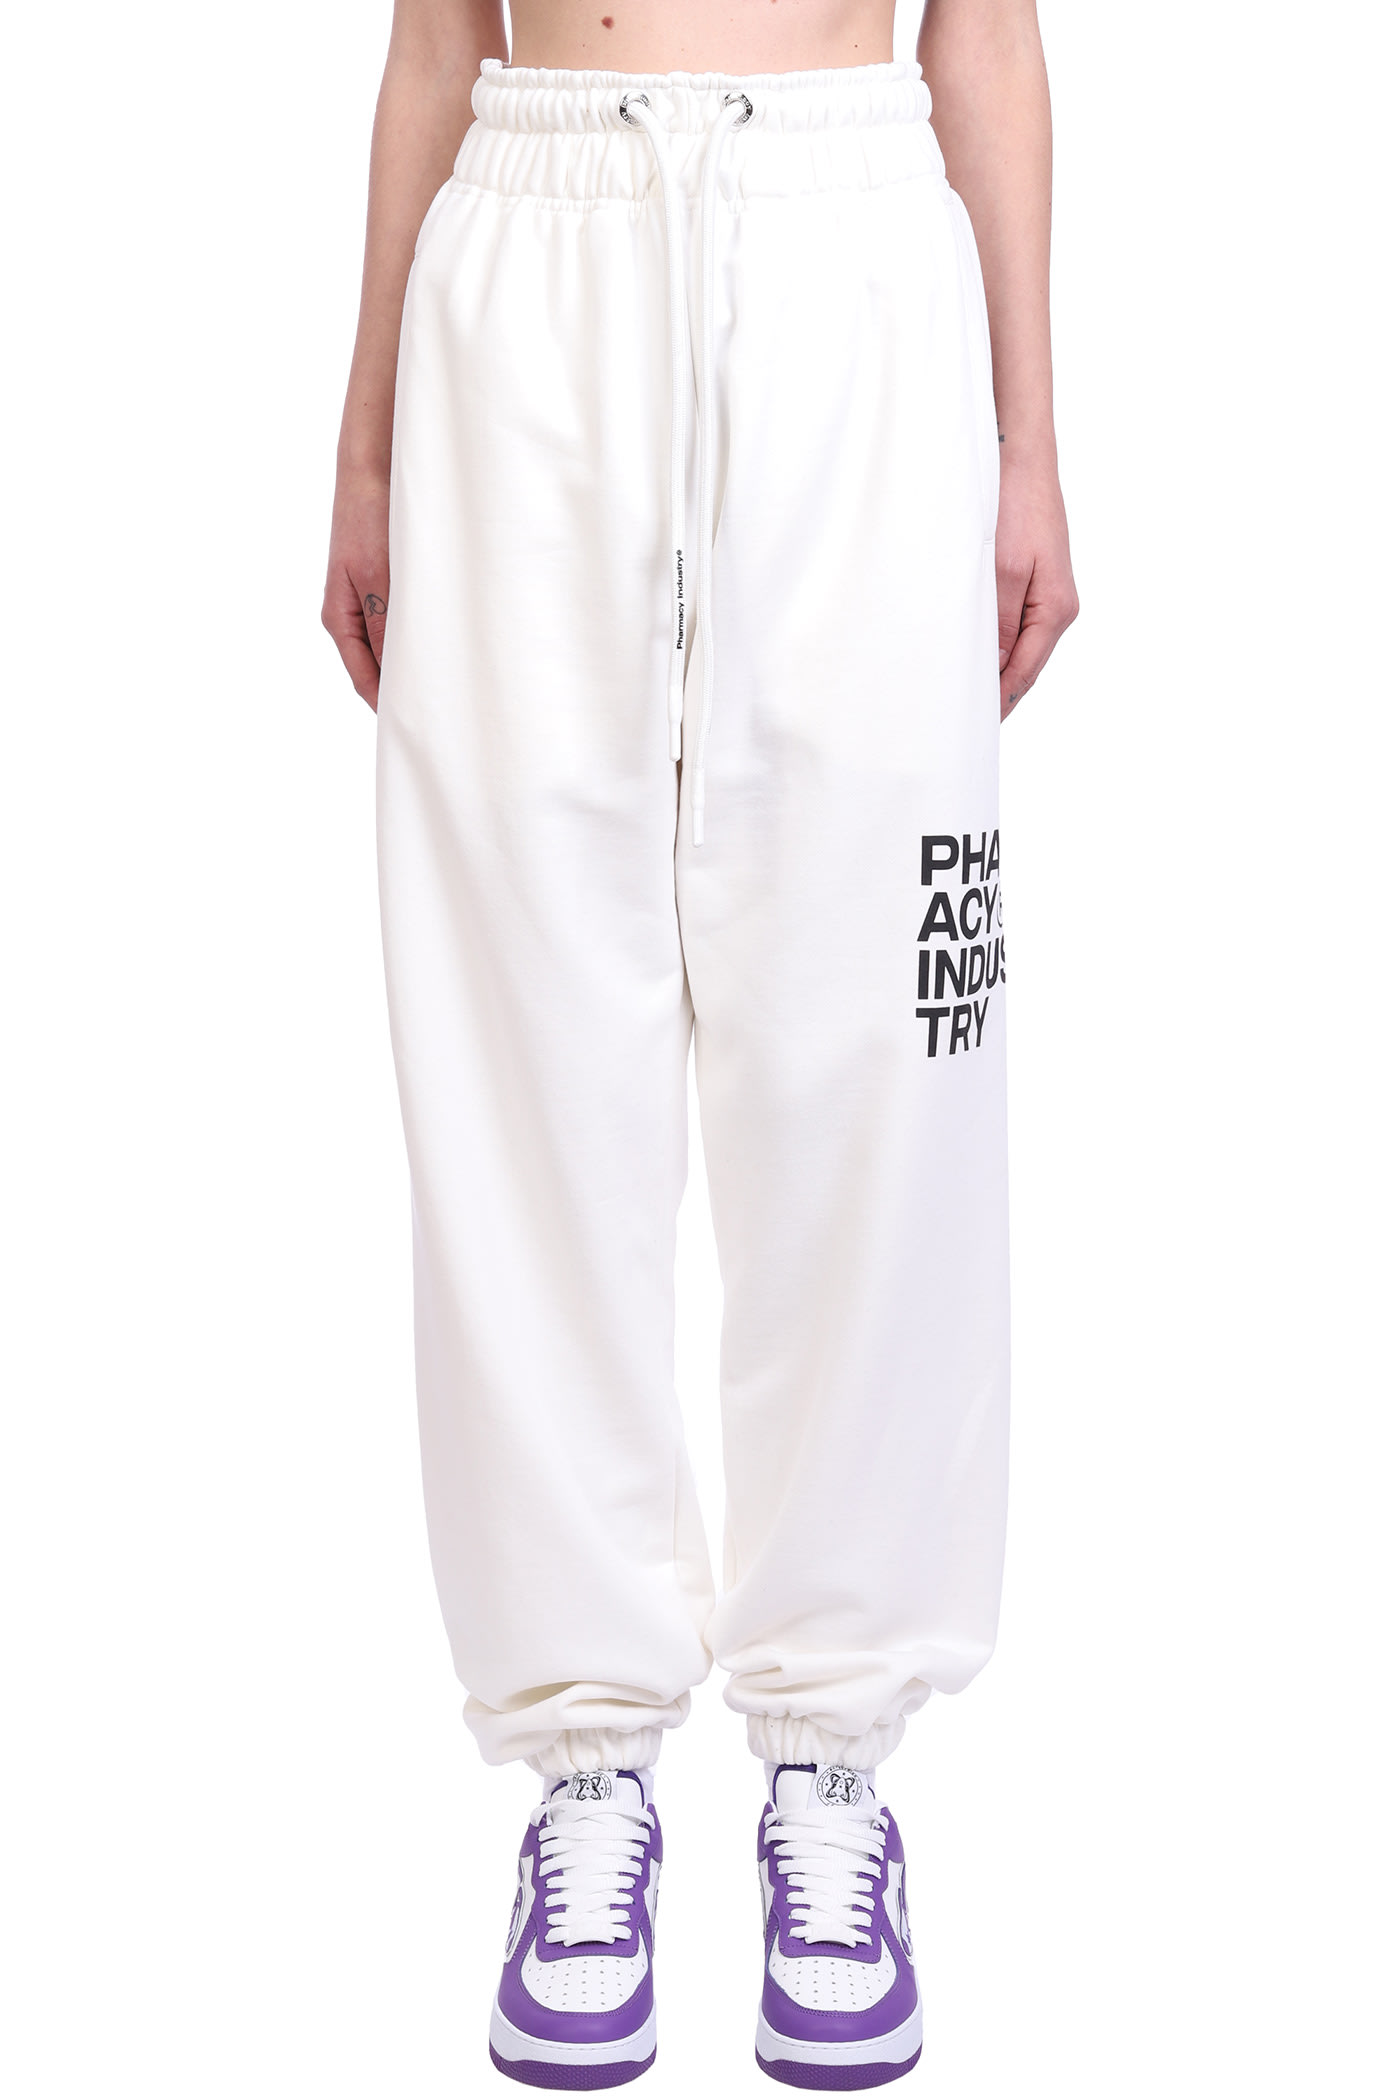 Pharmacy Industry Pants In White Cotton